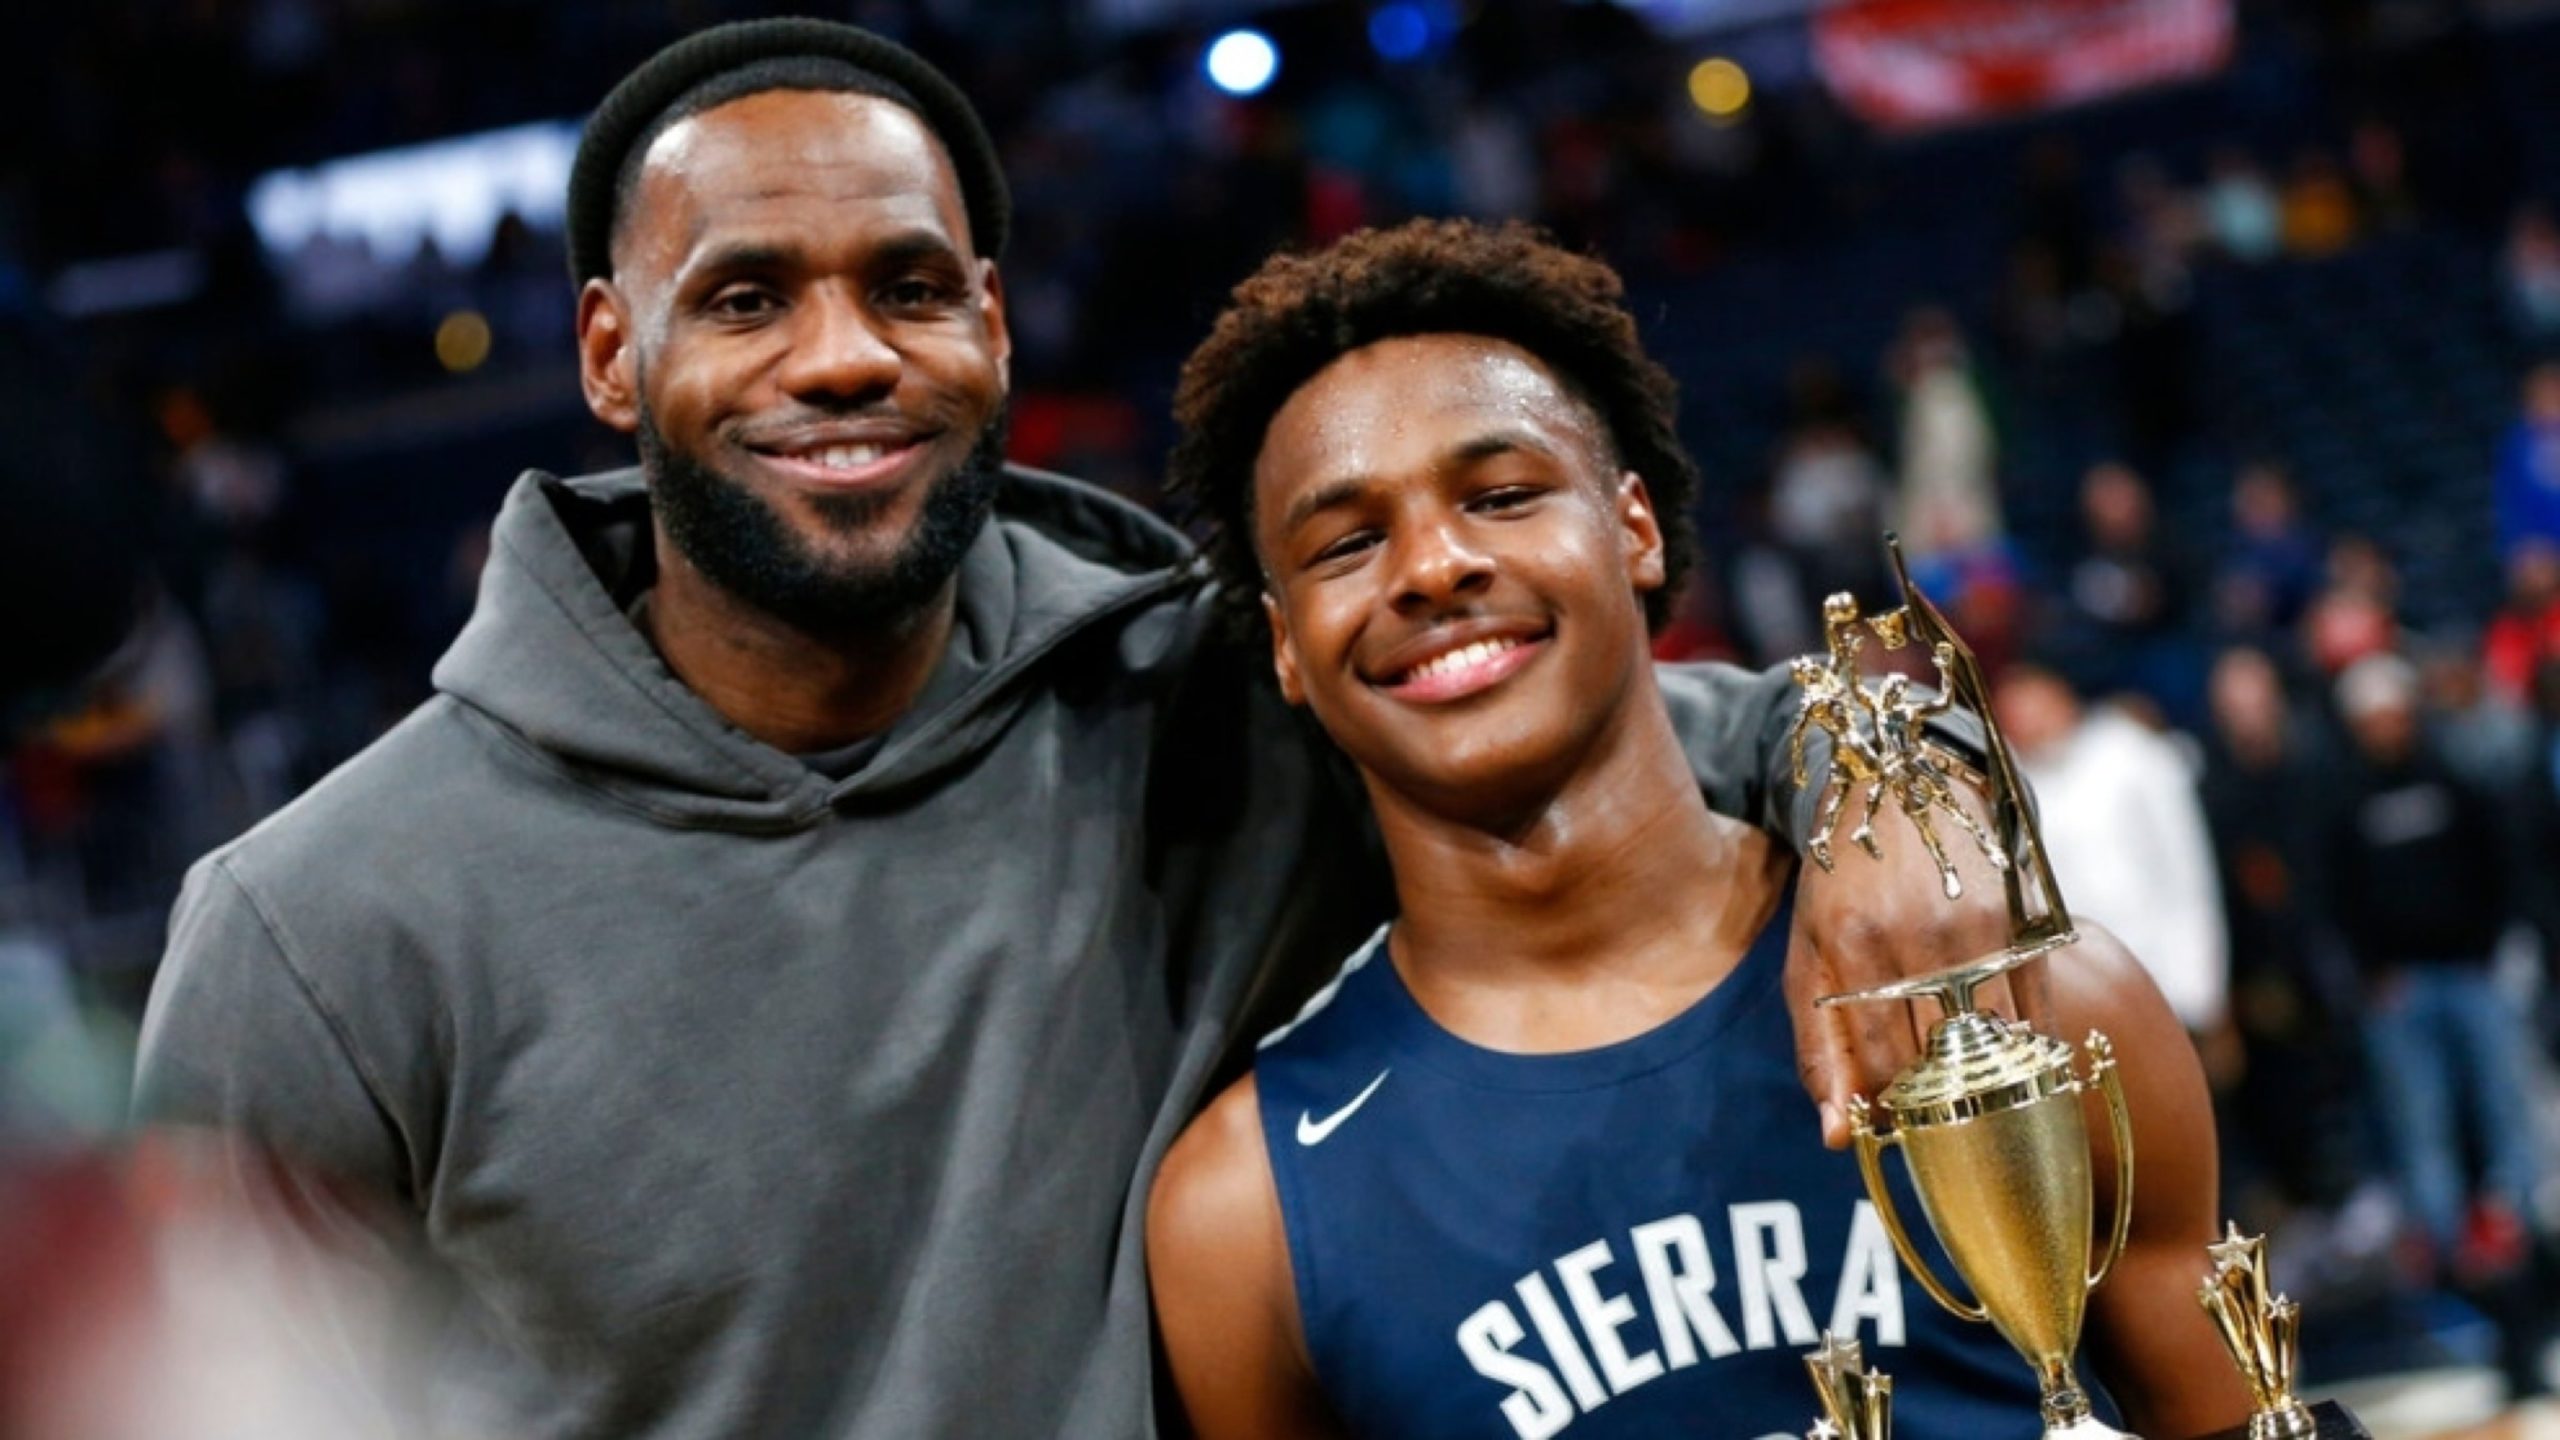 Can Bronnie Live Up To Dad's Promise To Play With Him in the NBA?